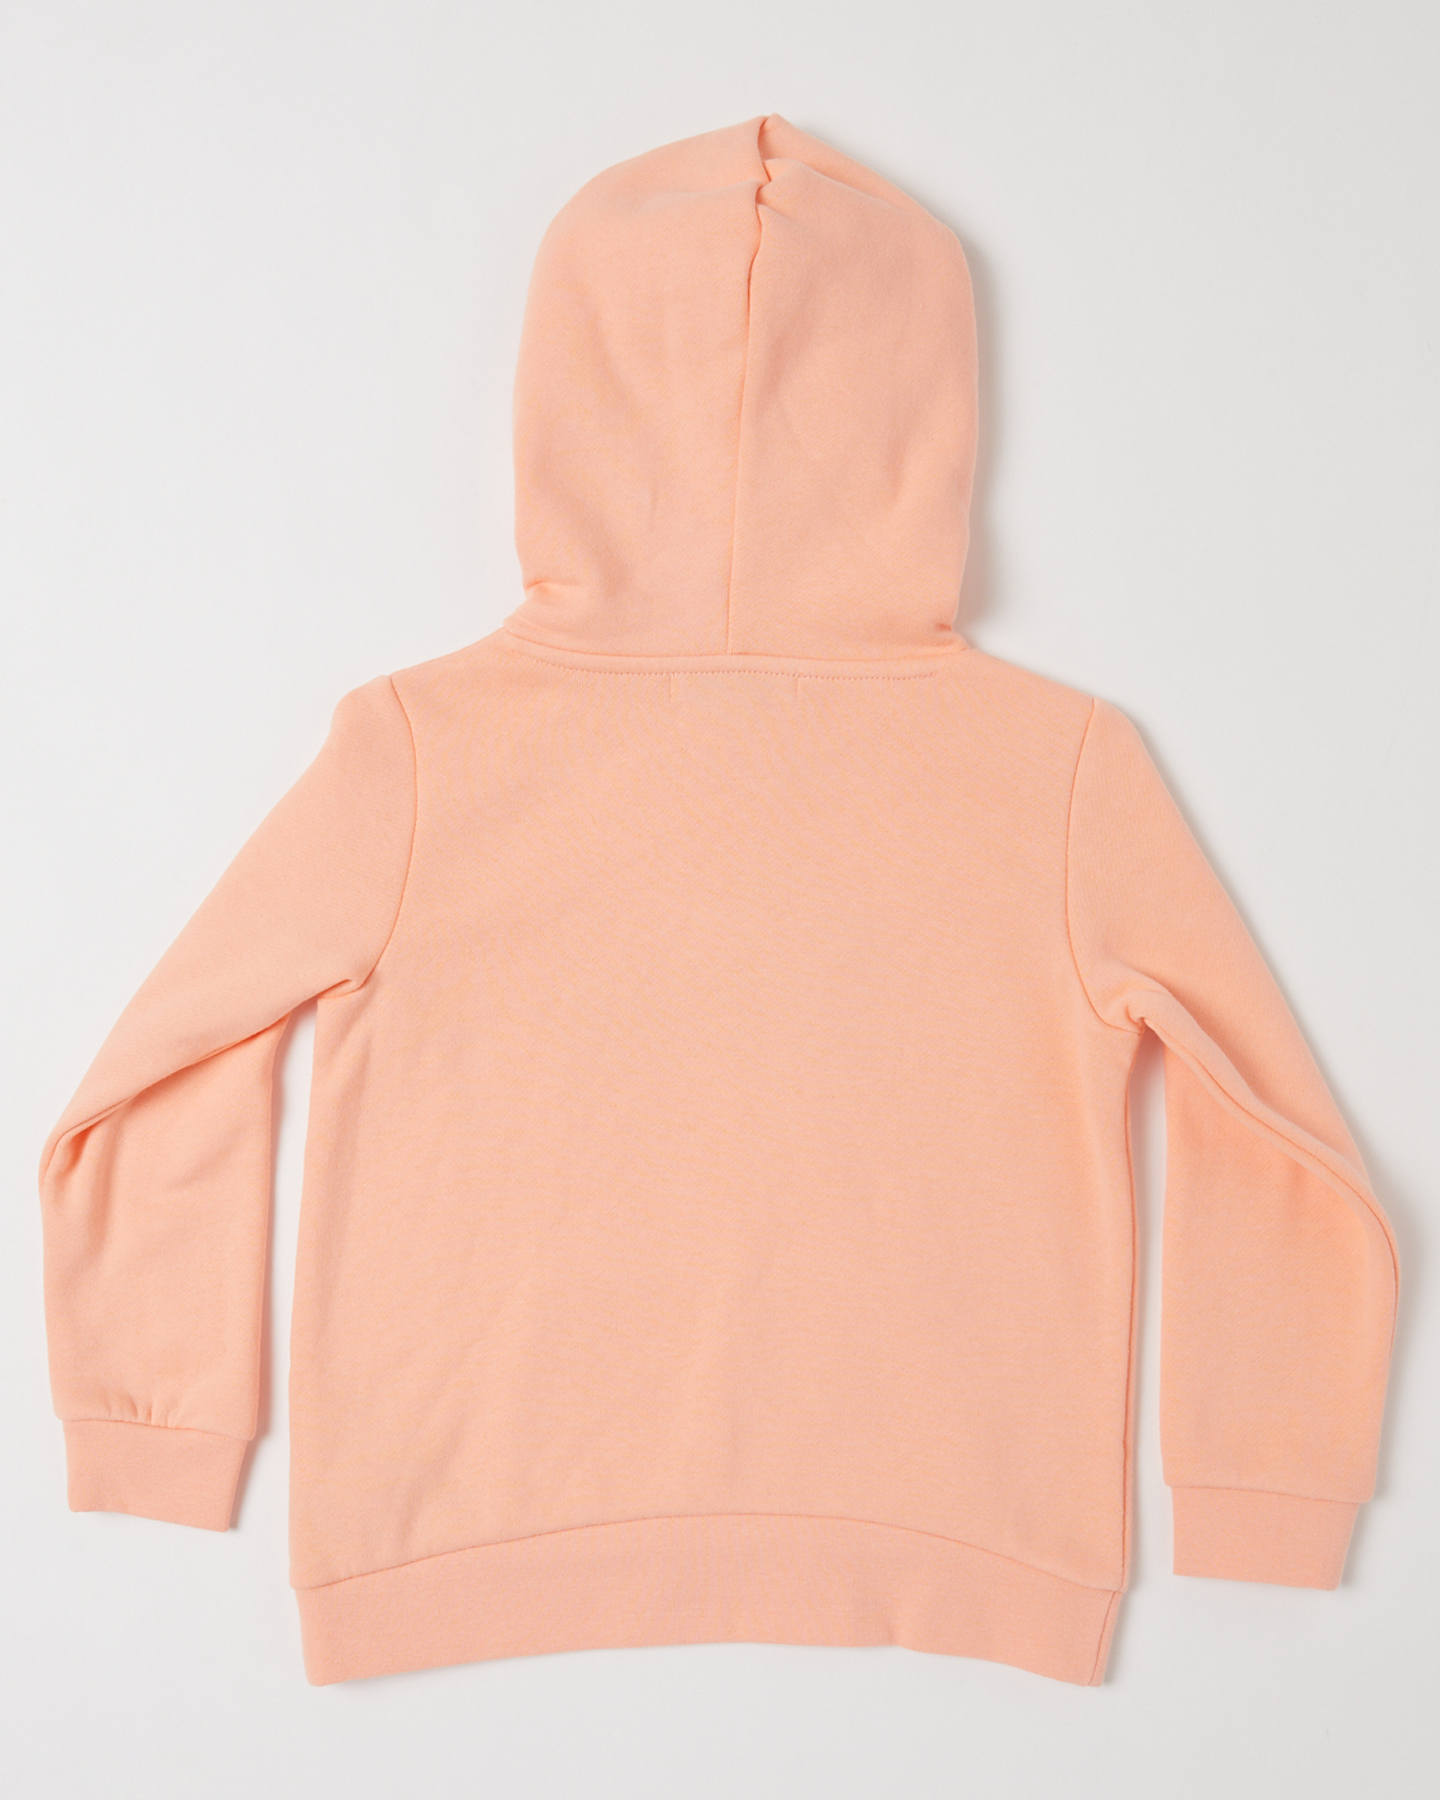 Rip Curl Low Tide Hood - Shell Coral | SurfStitch